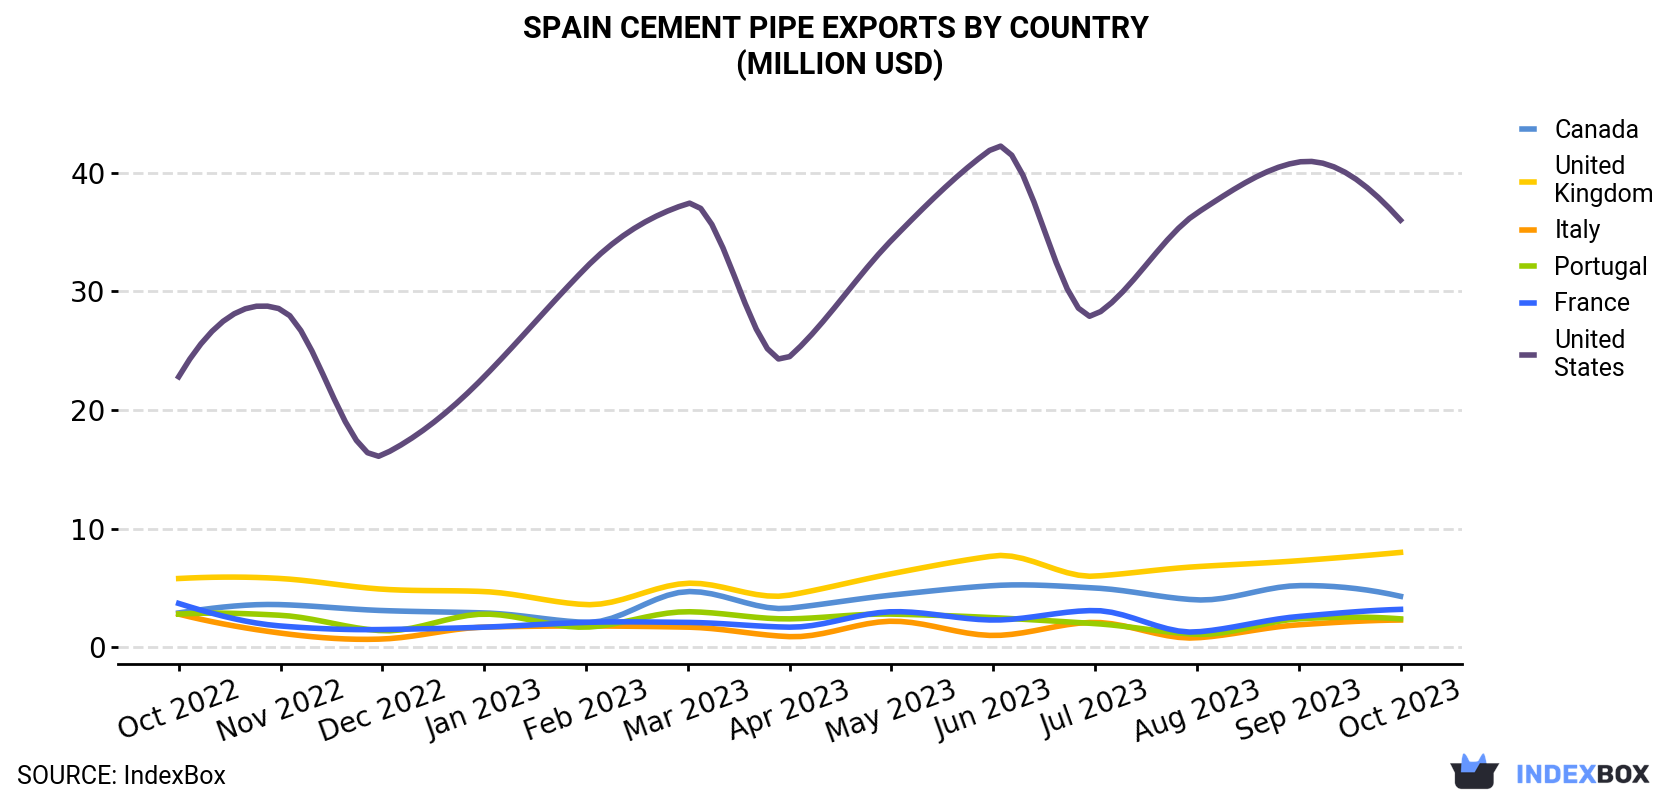 Spain Cement Pipe Exports By Country (Million USD)